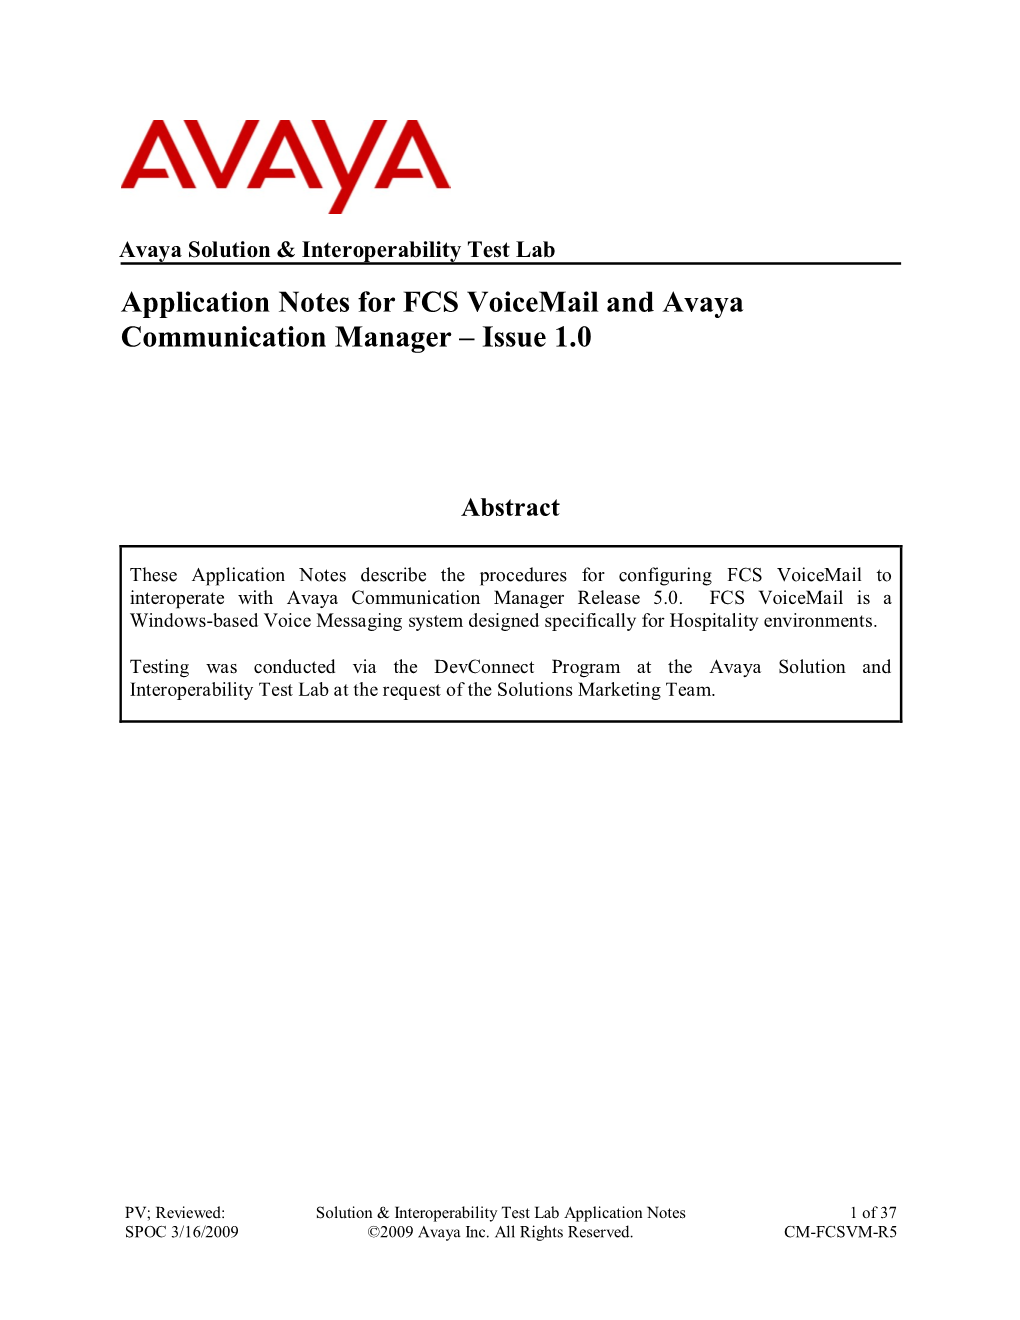 Application Notes for FCS Voicemail and Avaya Communication Manager – Issue 1.0